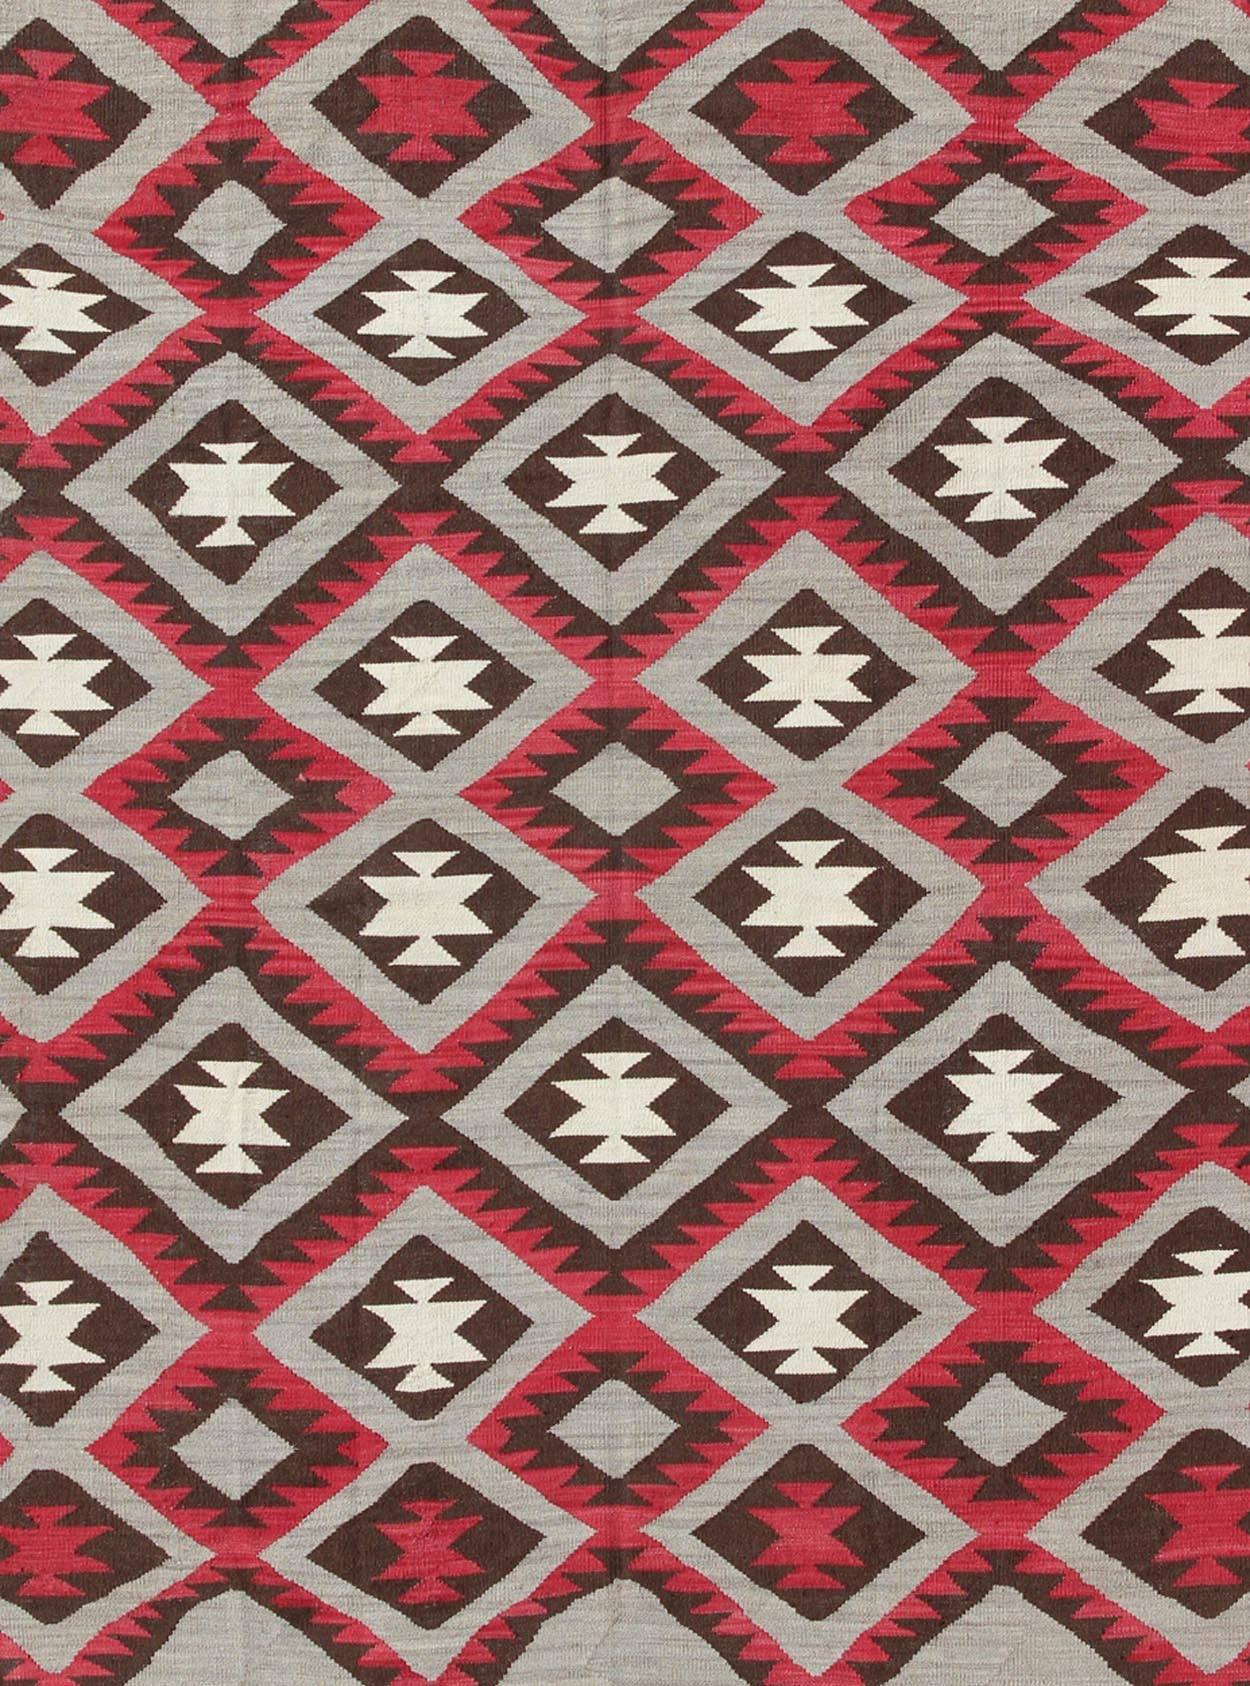 Hand-Knotted Large American Navajo Design Rug with Latticework Tribal Design in Red and Gray